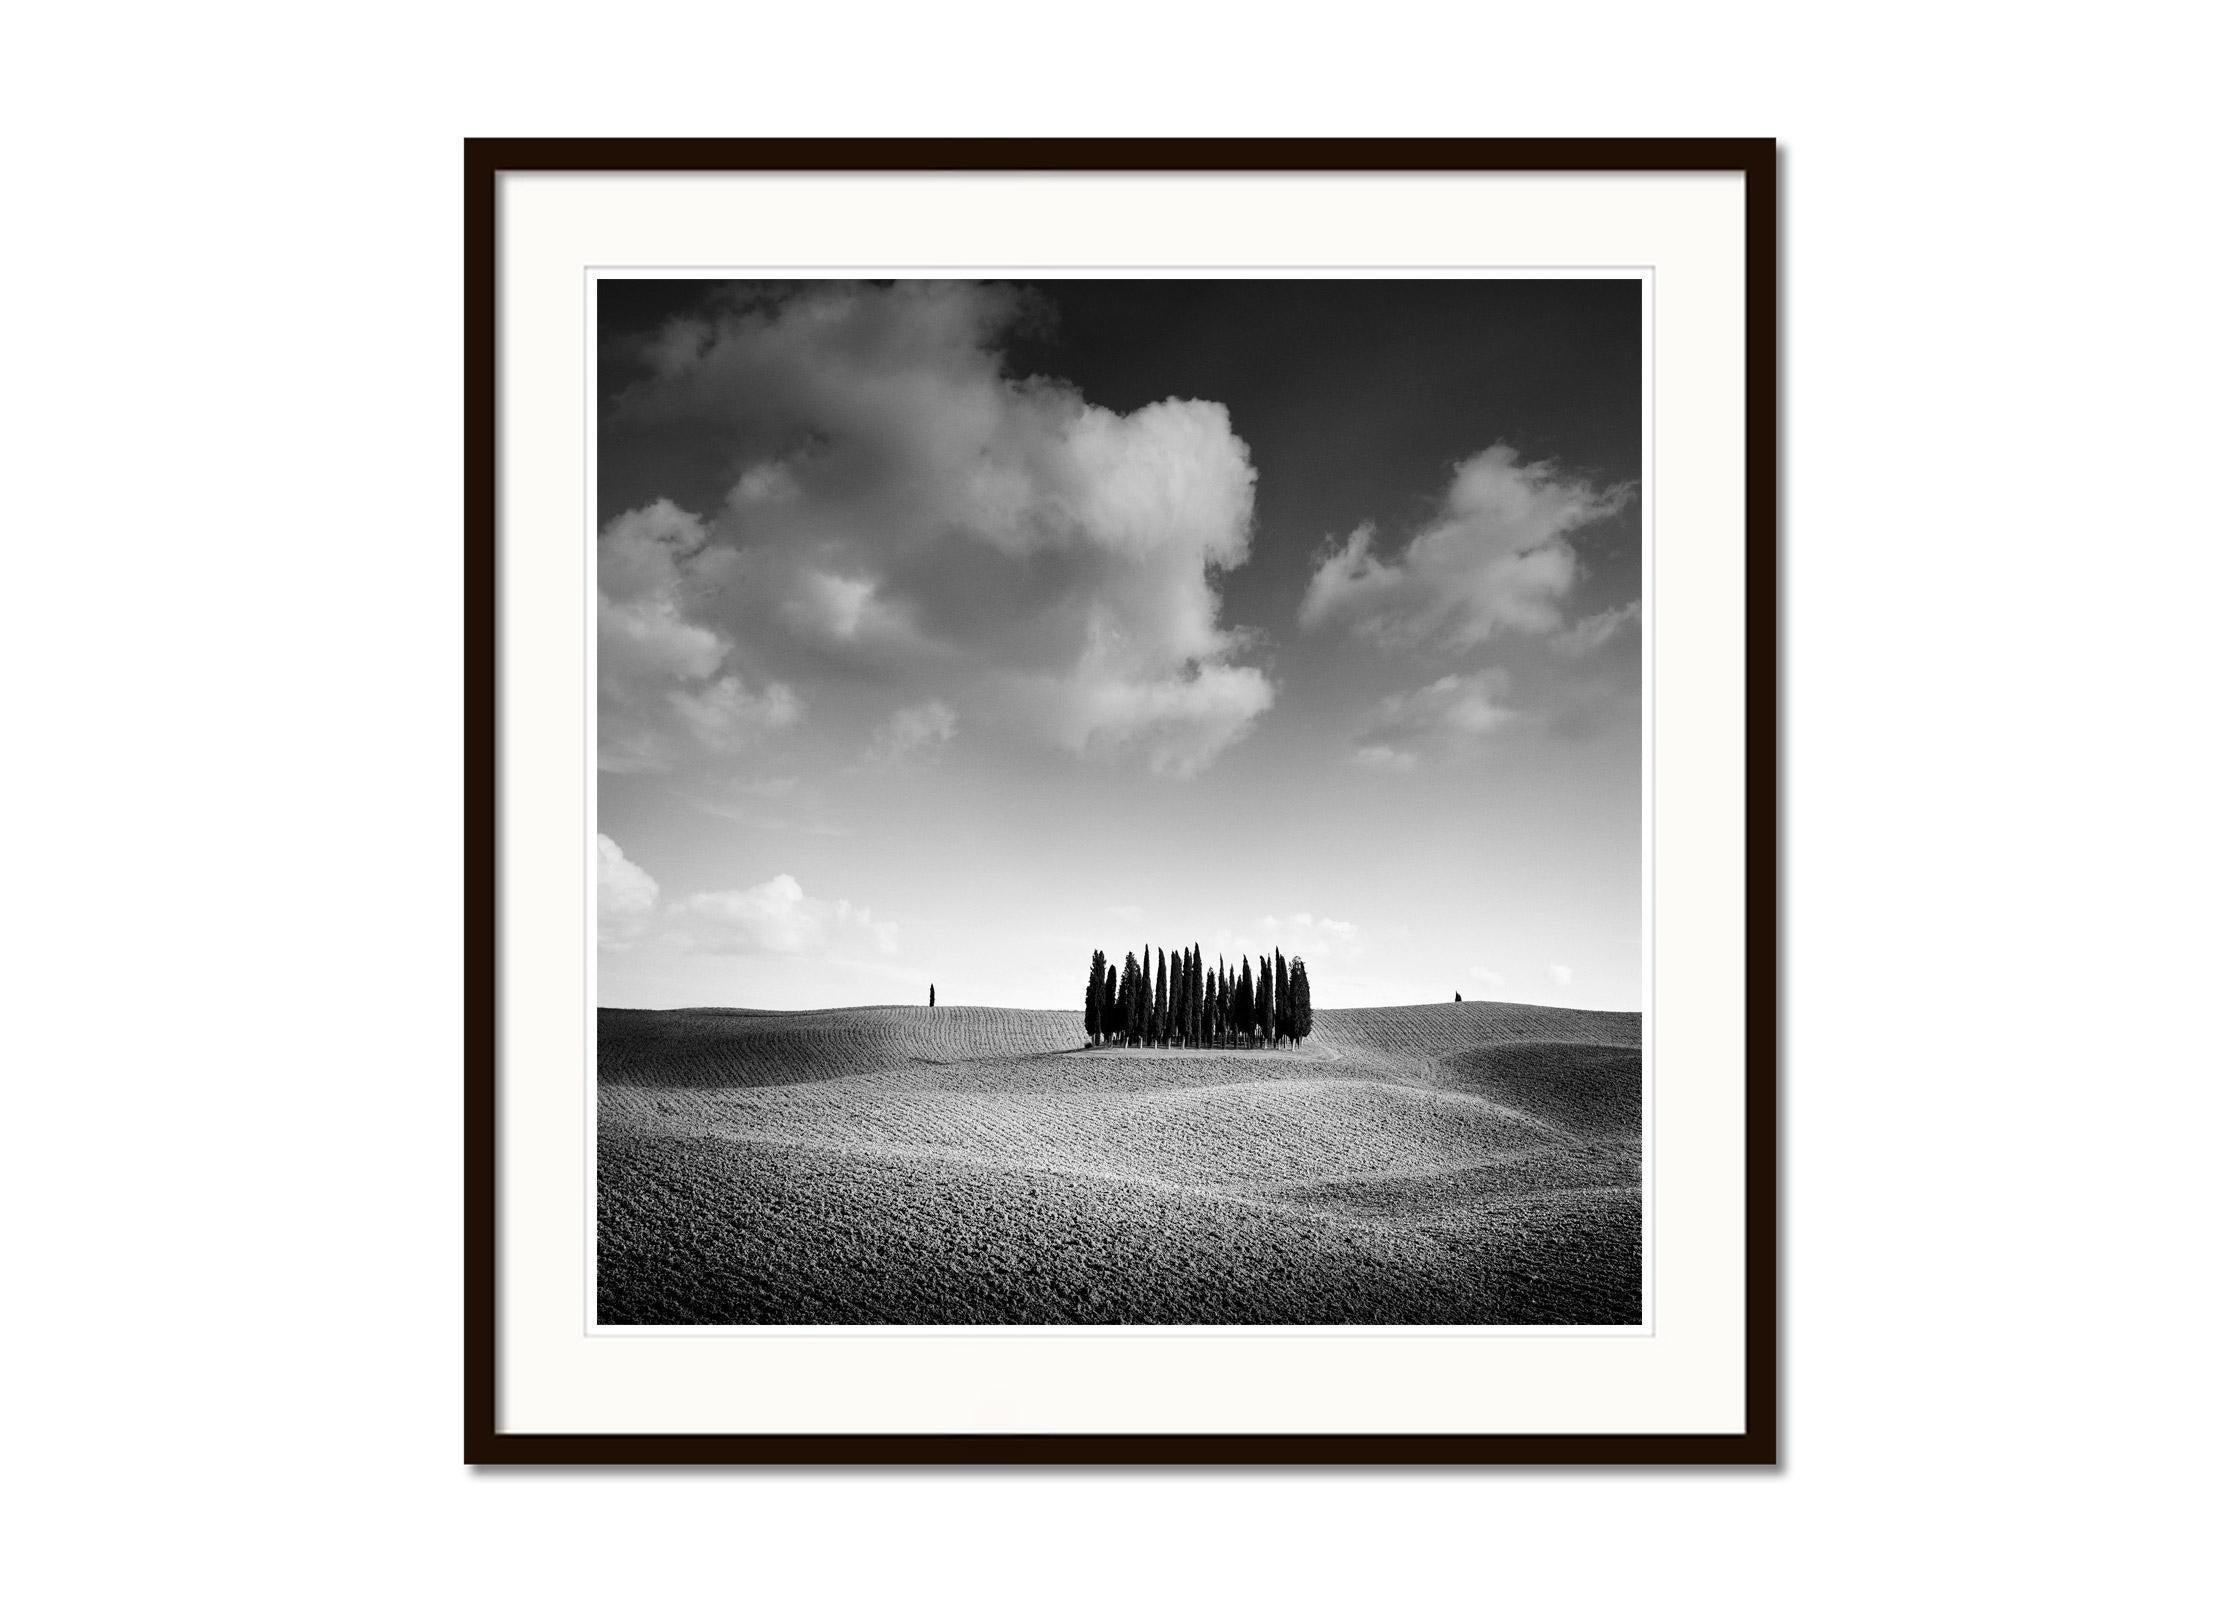 Black and White Fine Art landscape photography. Famous group of cypress trees in autumn on the hills of Tuscany, Italy. Archival pigment ink print, edition of 5. Signed, titled, dated and numbered by artist. Certificate of authenticity included.